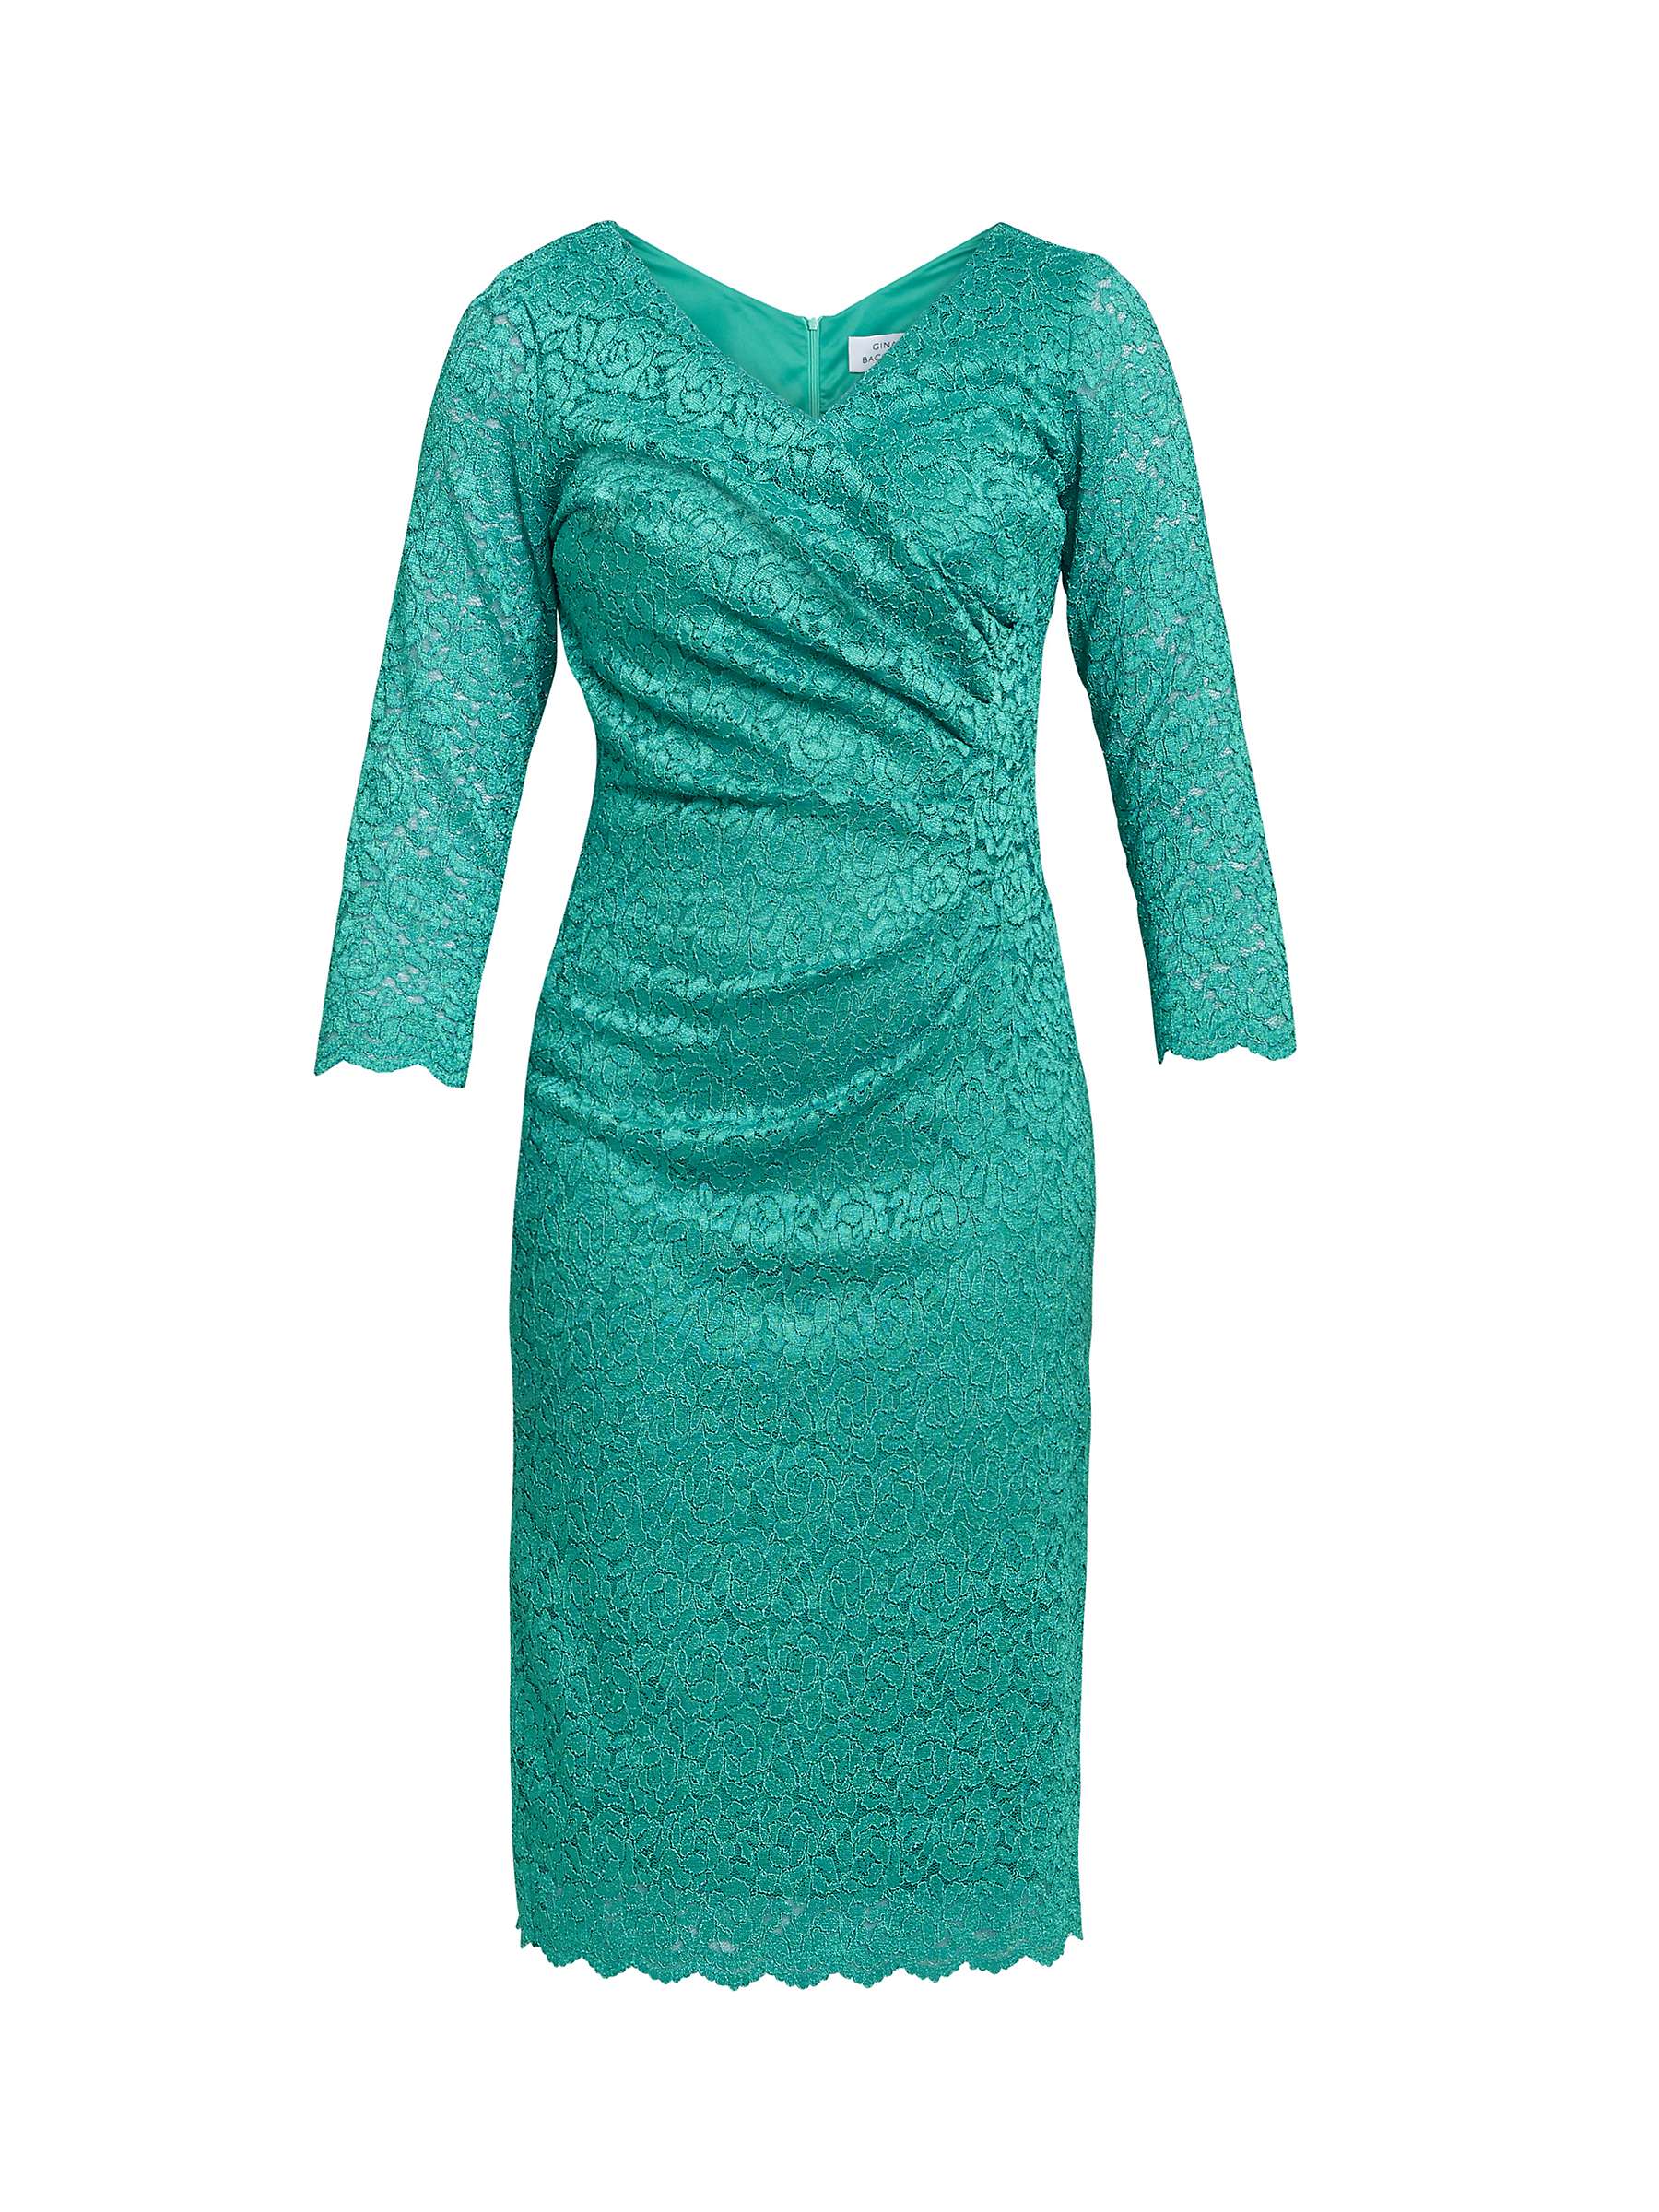 Buy Gina Bacconi Melody Lace Wrap Dress,  Jade Online at johnlewis.com